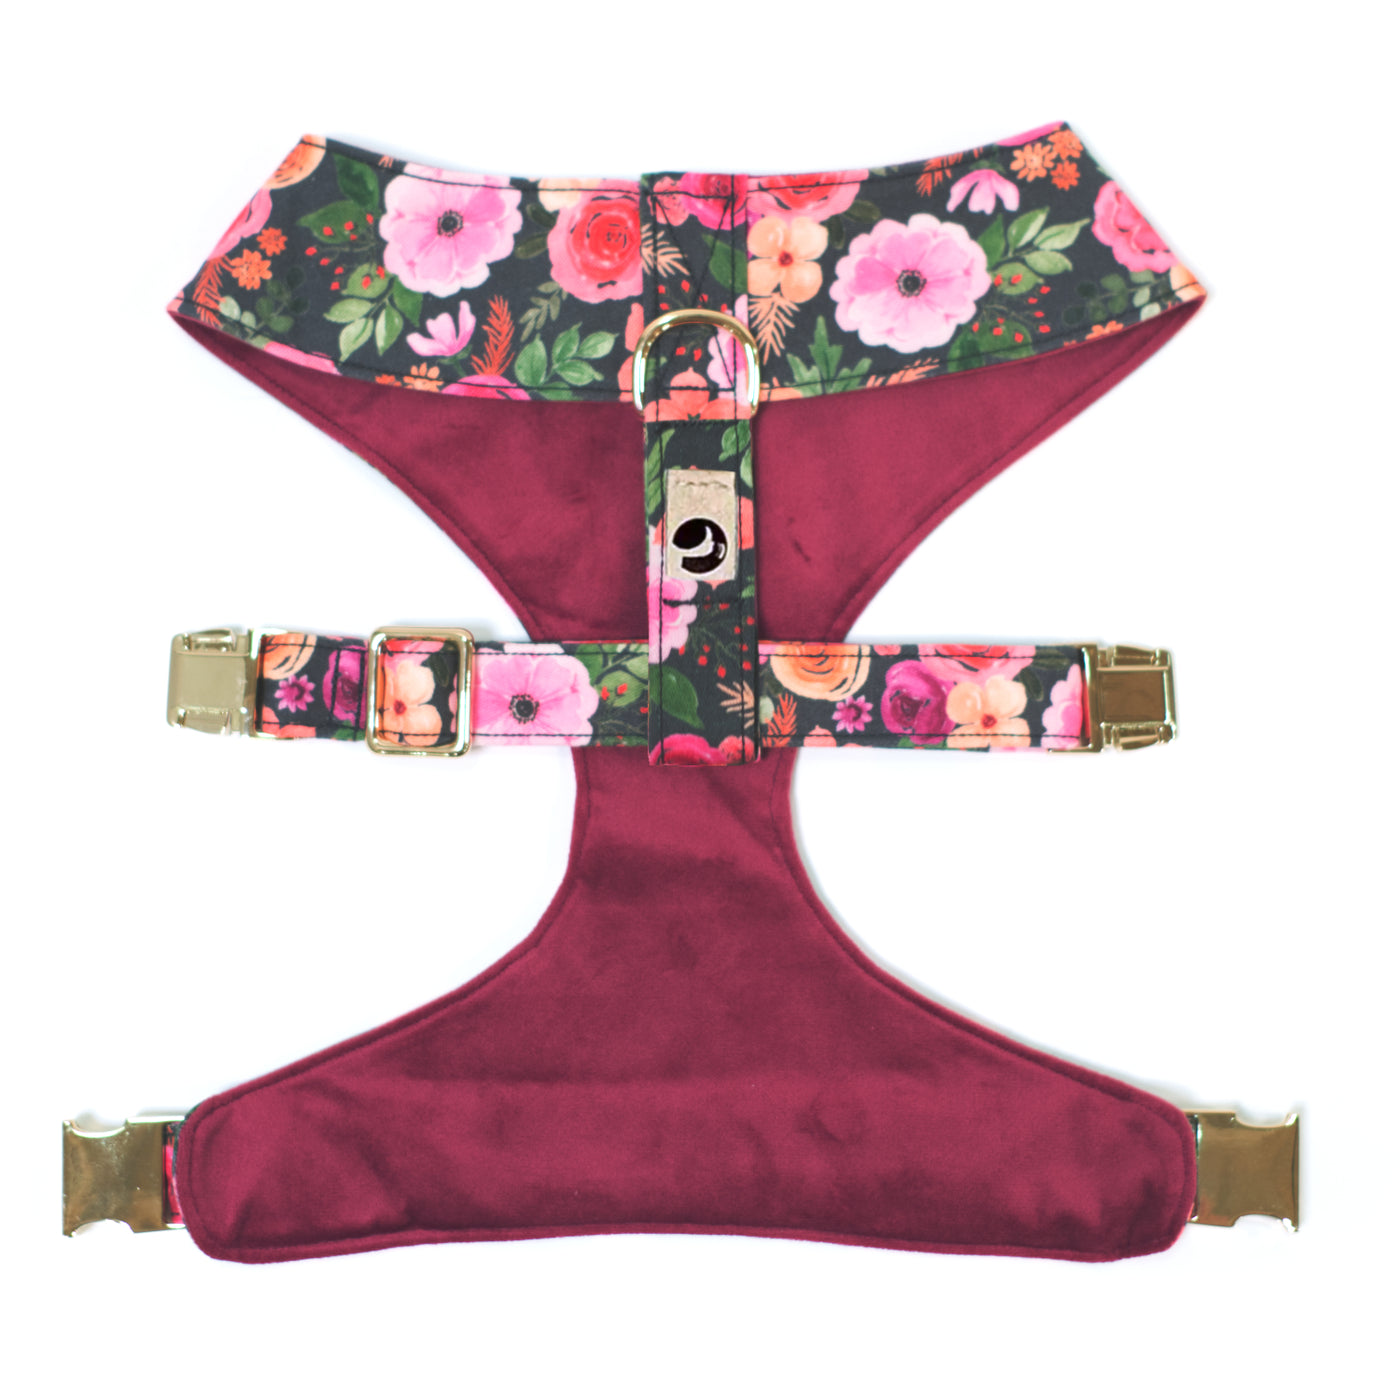 Top/back view of floral and velvet reversible dog harness in pinks 